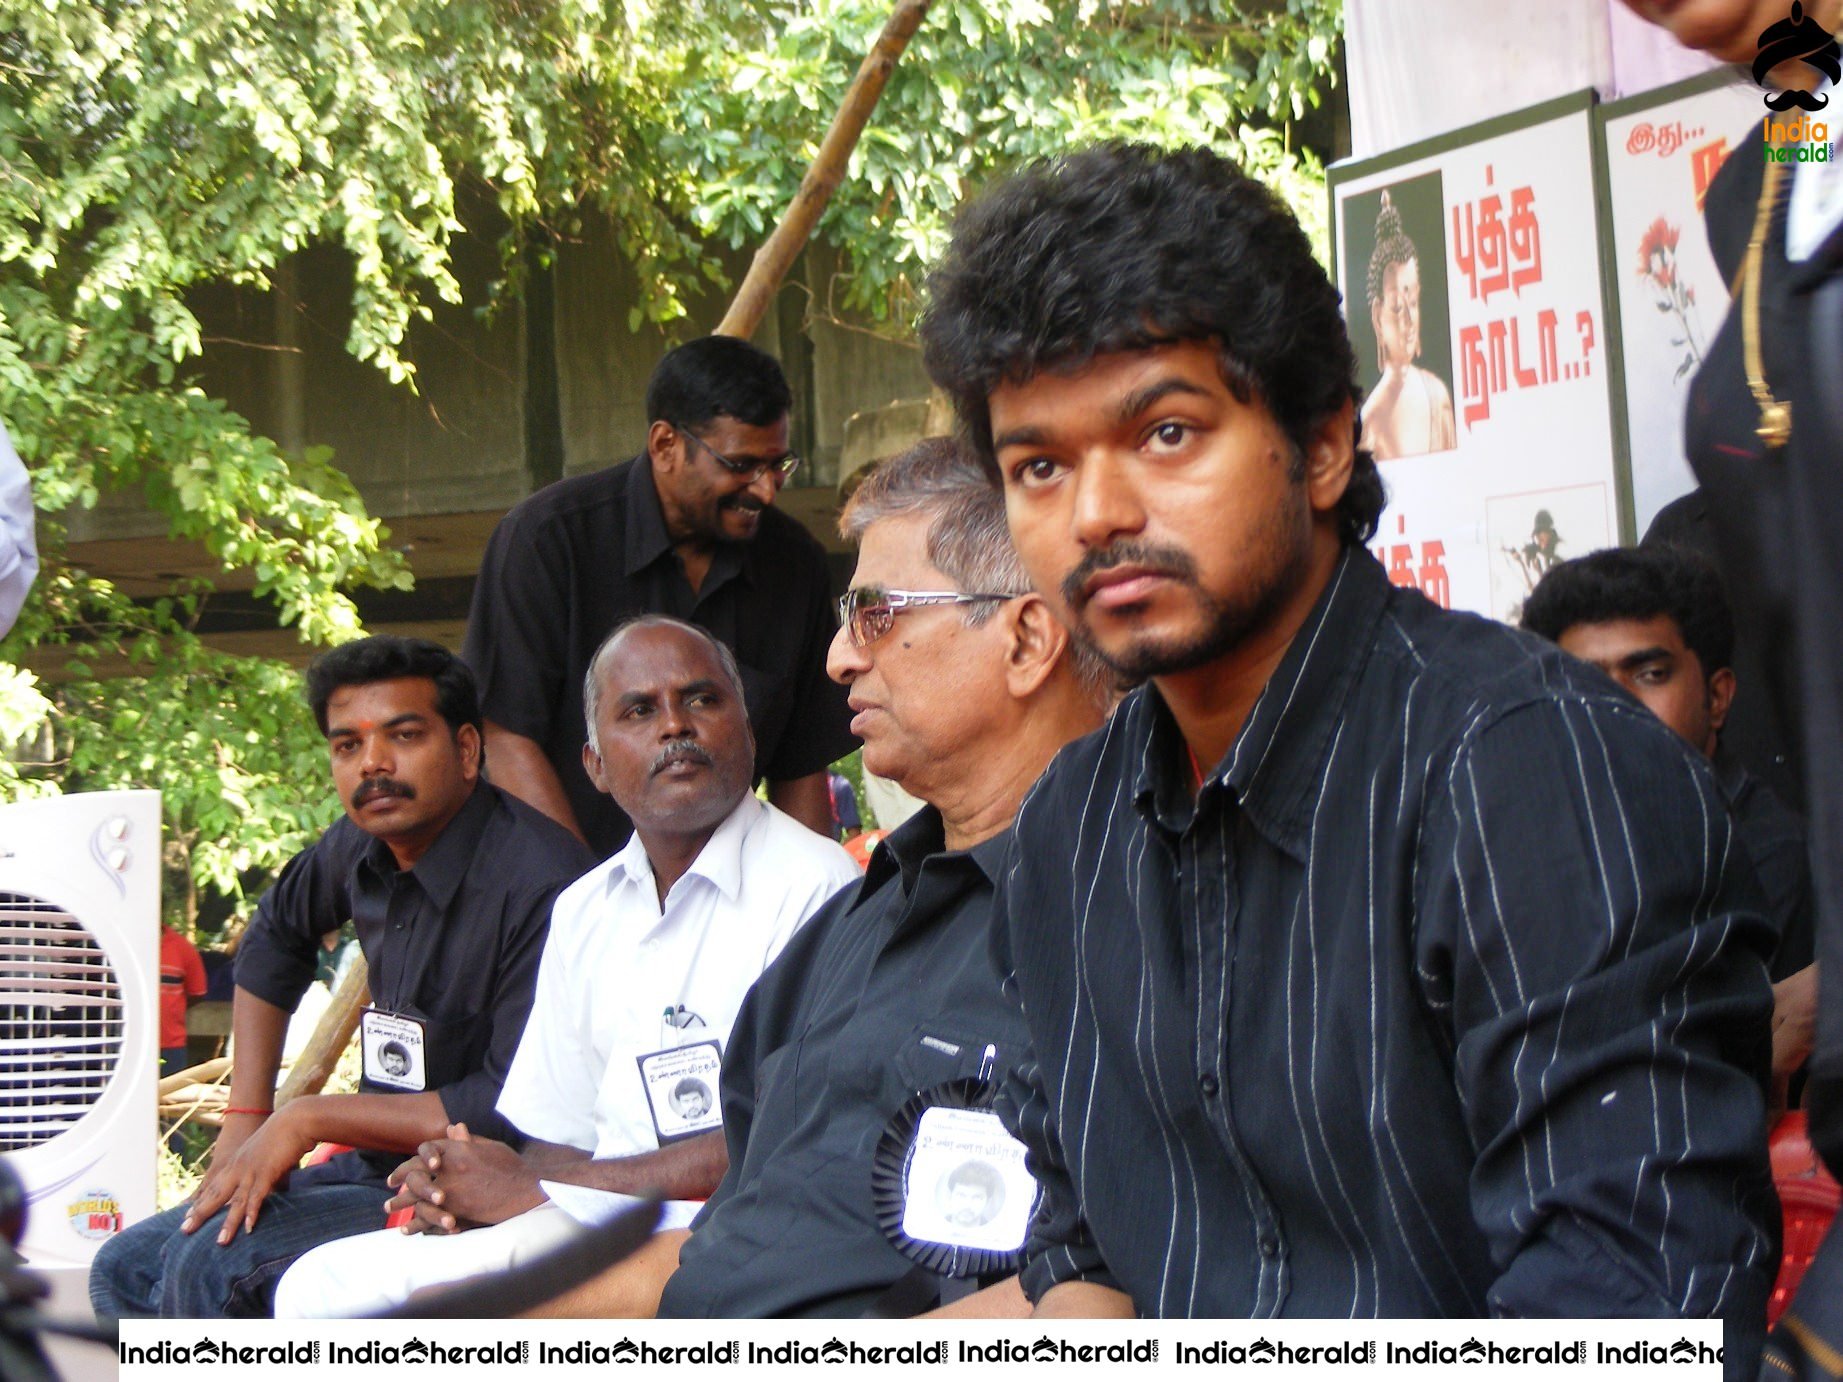 Actor Vijay with his wife while fasting for Eelam Tamils Set 2